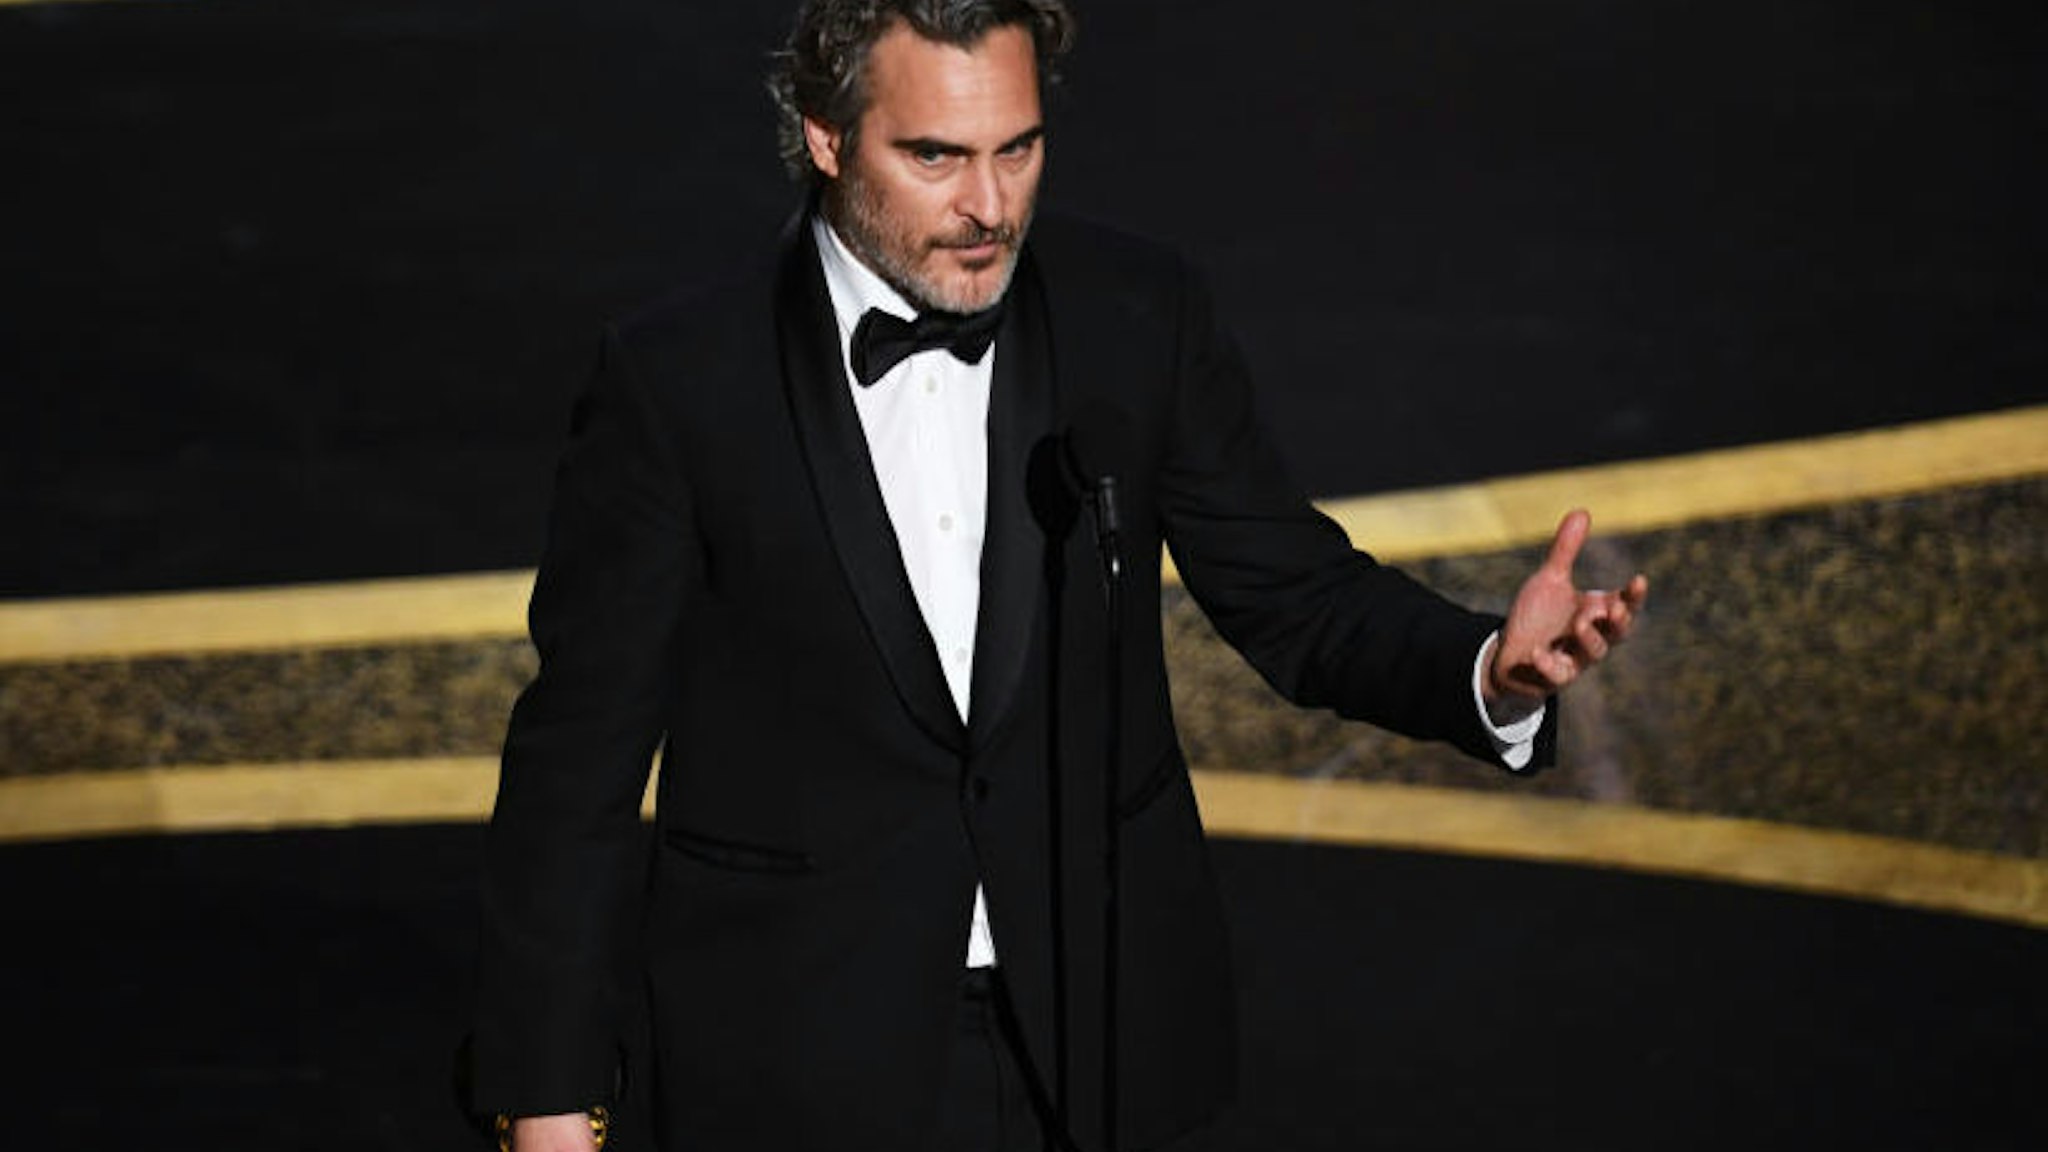 HOLLYWOOD, CALIFORNIA - FEBRUARY 09: Joaquin Phoenix accepts the Actor In A Leading Role award for 'Joker' onstage during the 92nd Annual Academy Awards at Dolby Theatre on February 09, 2020 in Hollywood, California.